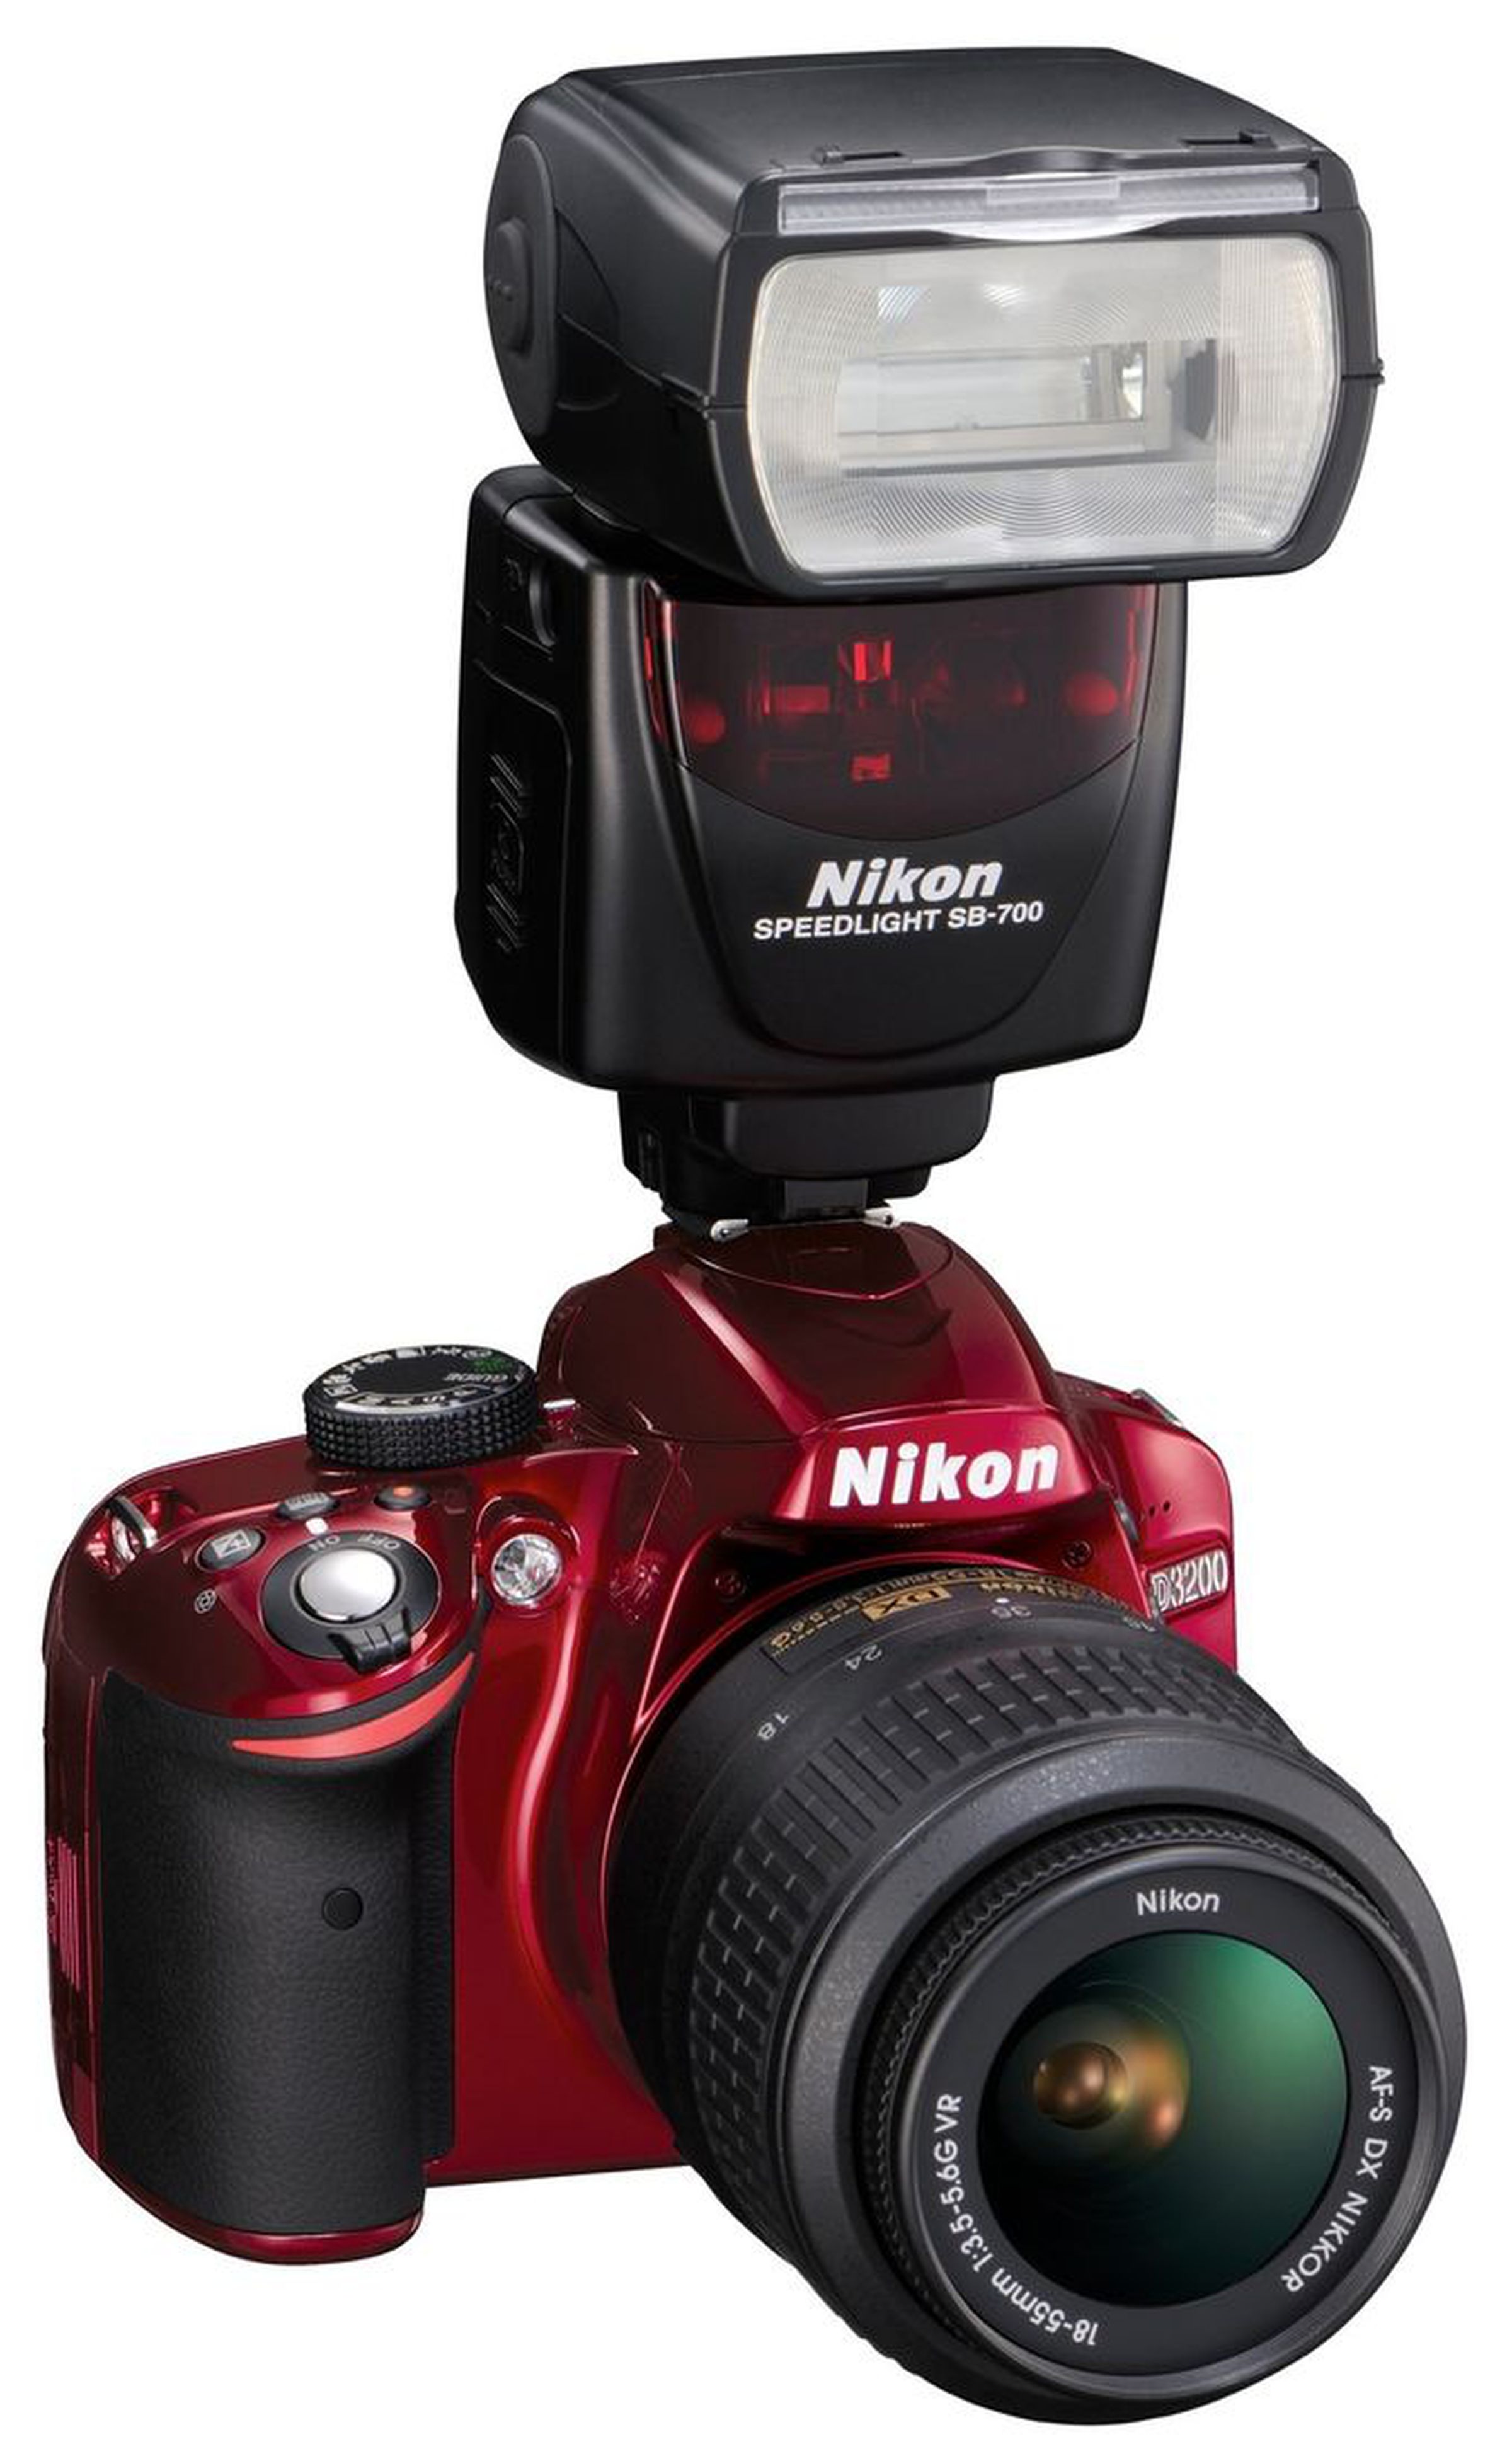 Nikon D3200 and WU-1a Wireless Mobile Adapter press shots